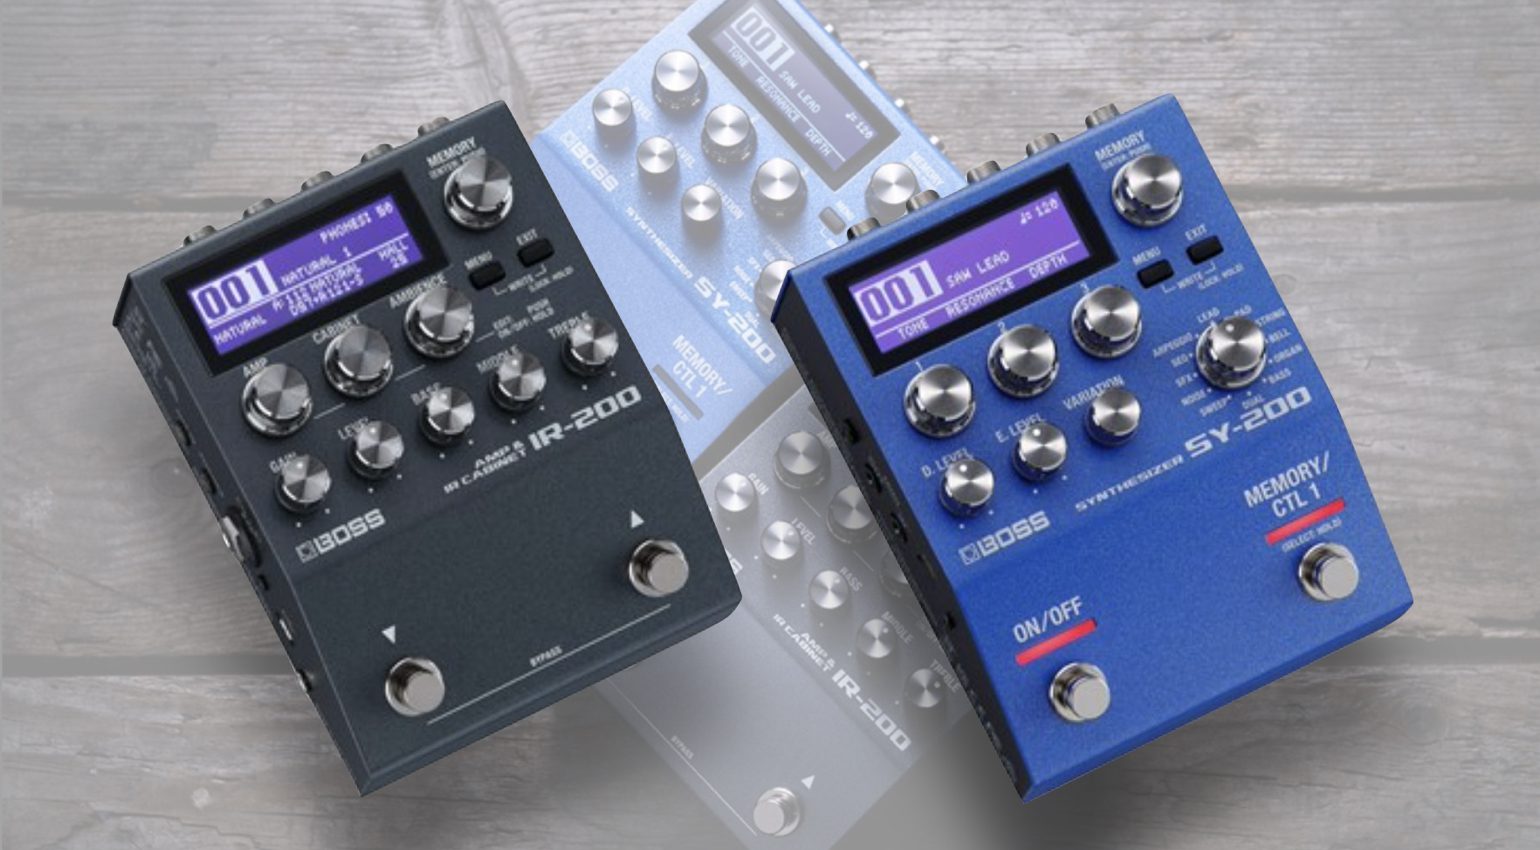 The Boss IR-200 and SY-200 add IRs and Synthesis to your 'board